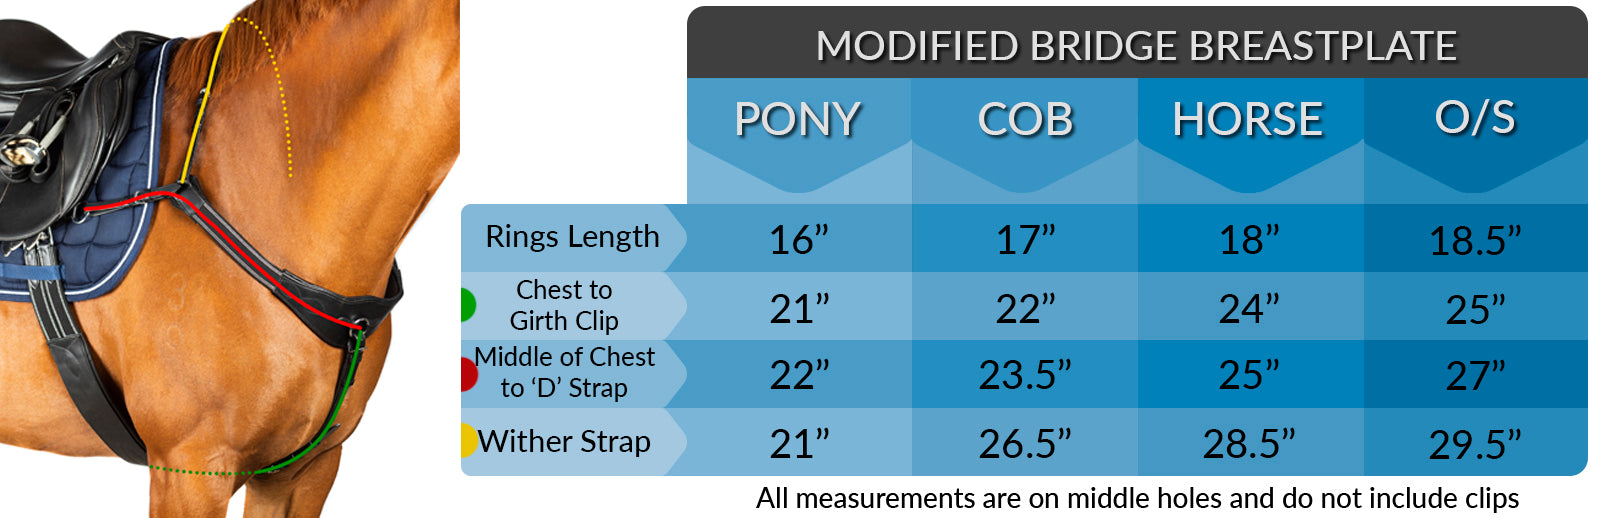 3 POINT BREASTPLATE SIZE CHART